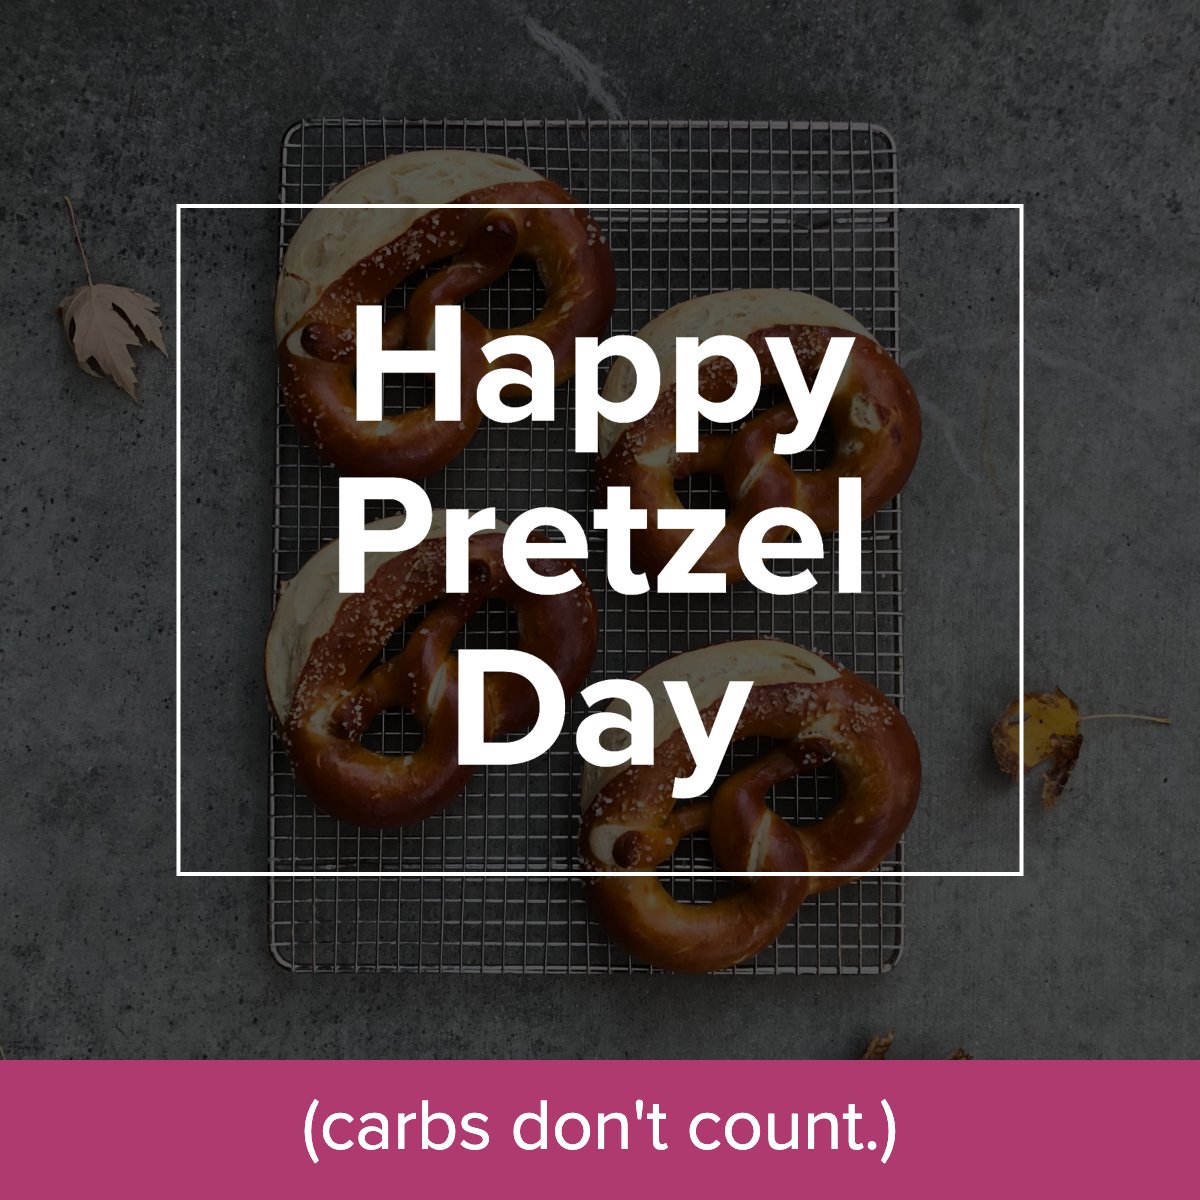 Happy Pretzel Day! This day was declared in 2003, in Pennsylvania by Ed Rendell who was governor at that time. Do you have a favorite pretzel brand or place? Comment below!!! #pretzel #pretzels #pretzelday #barbarabarker #barrettrealestate #barbarabarkerteam